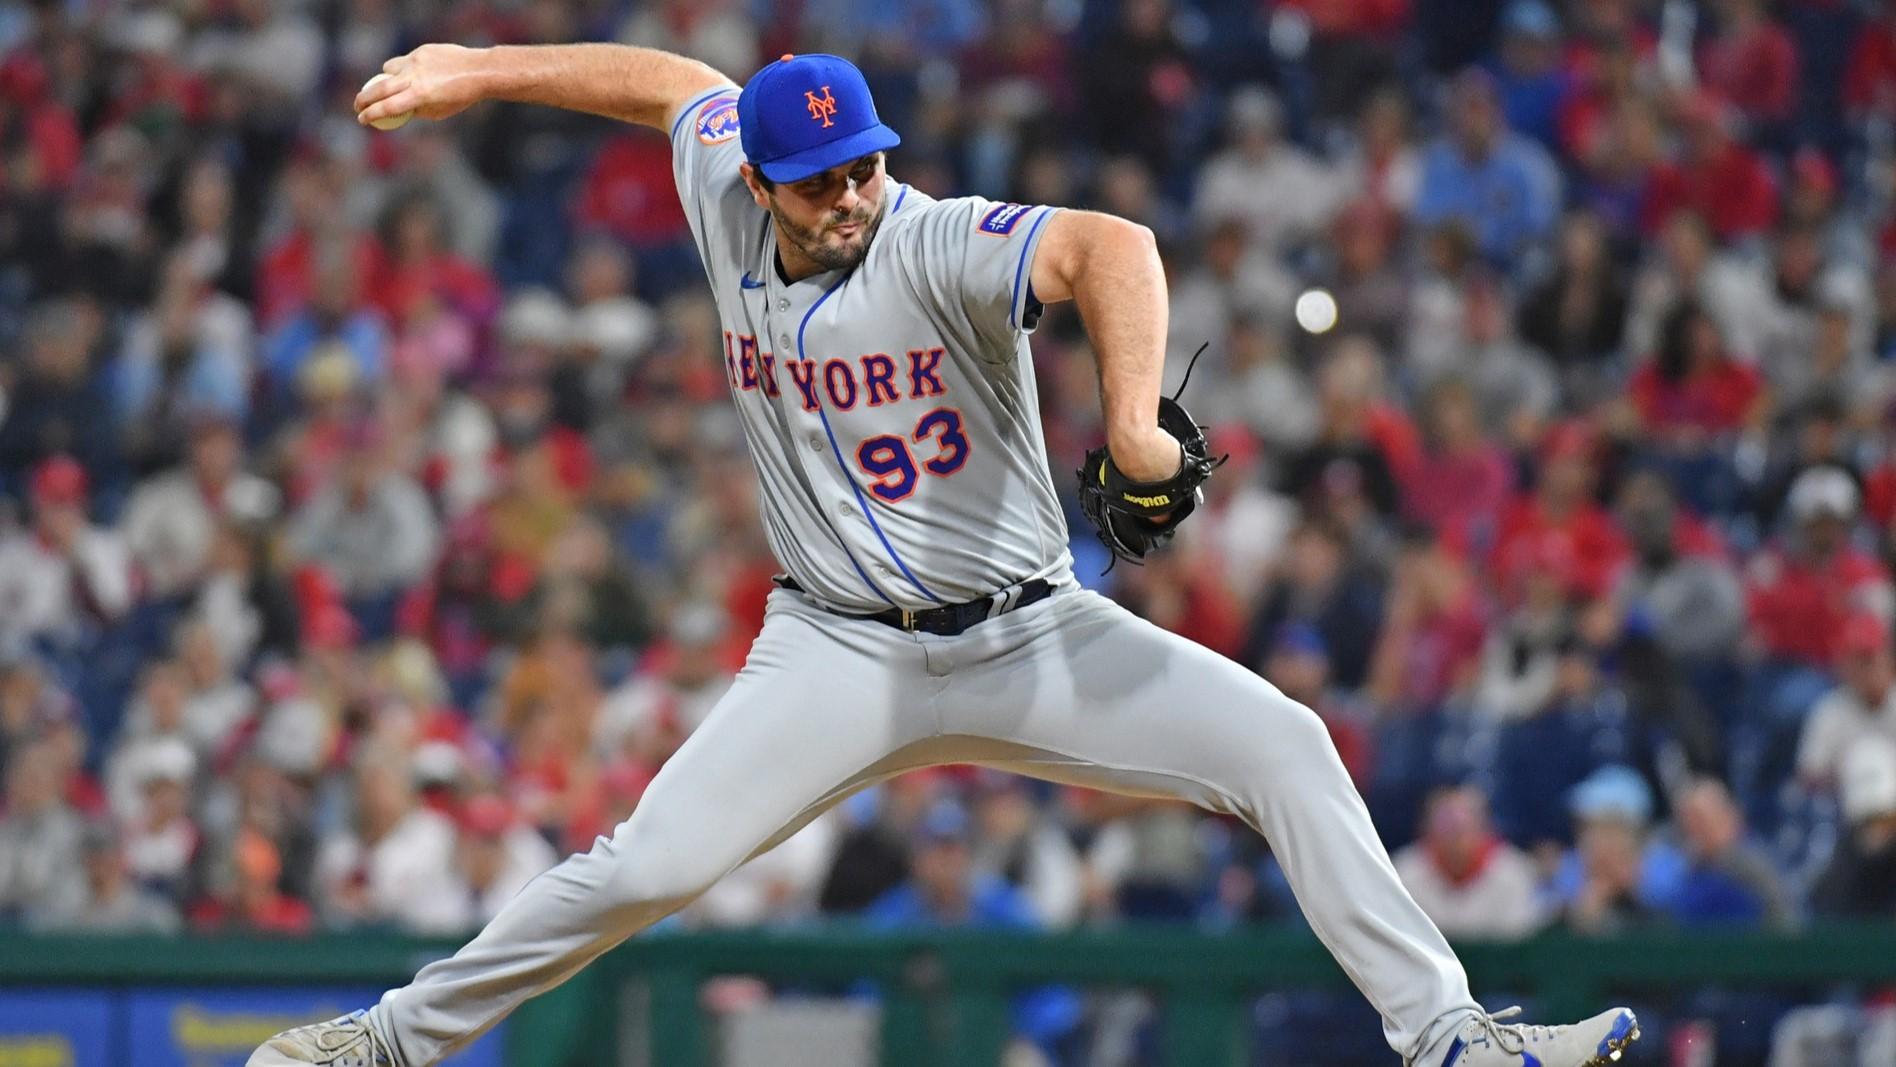 Mets reliever Grant Hartwig undergoes knee surgery to address torn meniscus